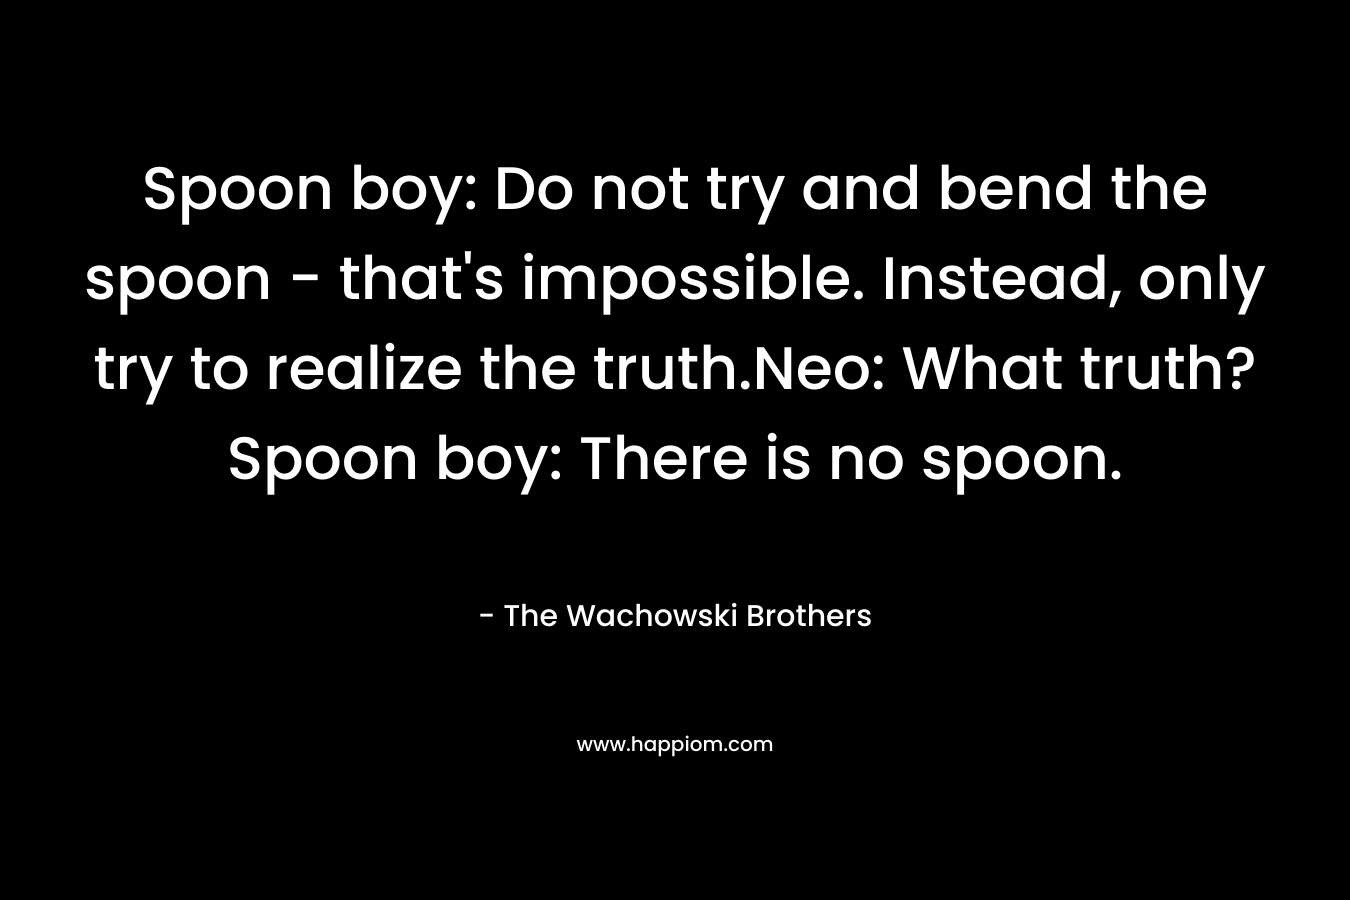 Spoon boy: Do not try and bend the spoon – that’s impossible. Instead, only try to realize the truth.Neo: What truth?Spoon boy: There is no spoon. – The Wachowski Brothers